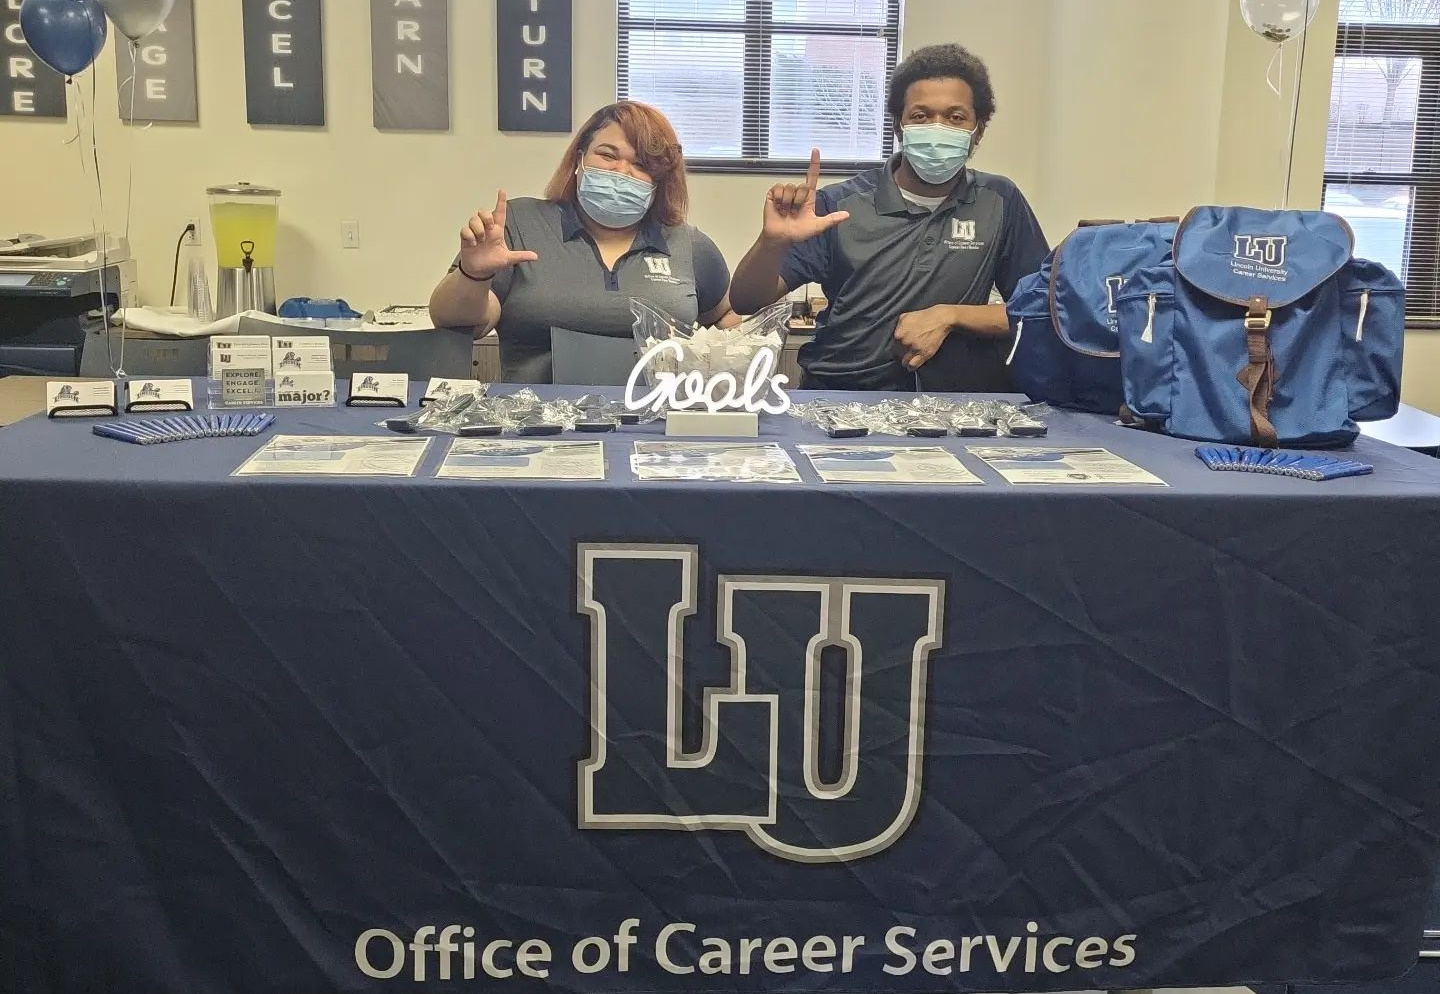  Lincoln University of Missouri students Asia Duncan and Austin Gaither are trained career peer mentors, helping prepare other Lincoln students to successfully gain internships and jobs.